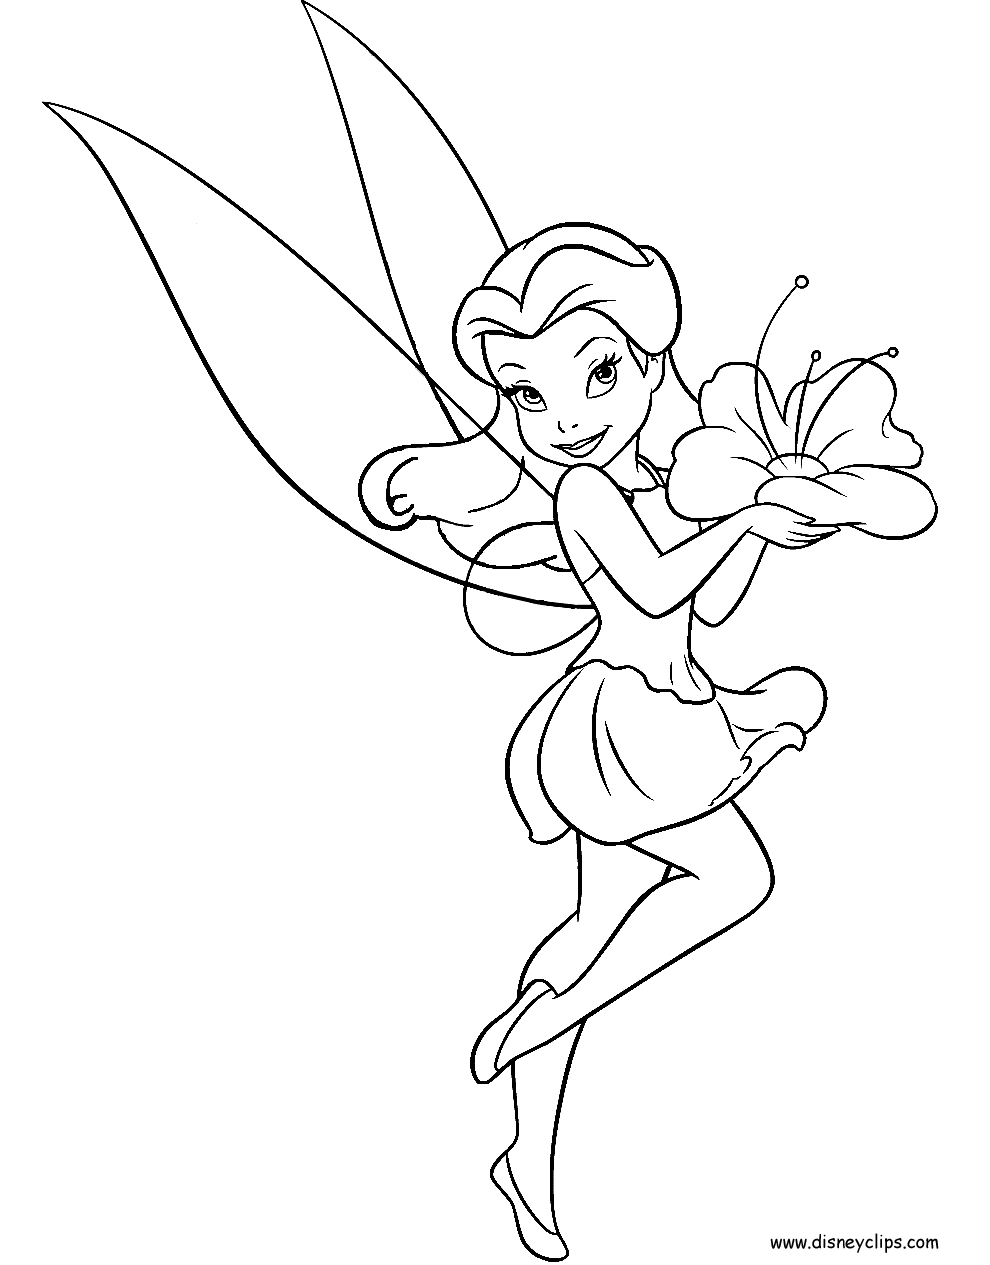 Download Disney Fairies Coloring Pages (3) | Disneyclips.com